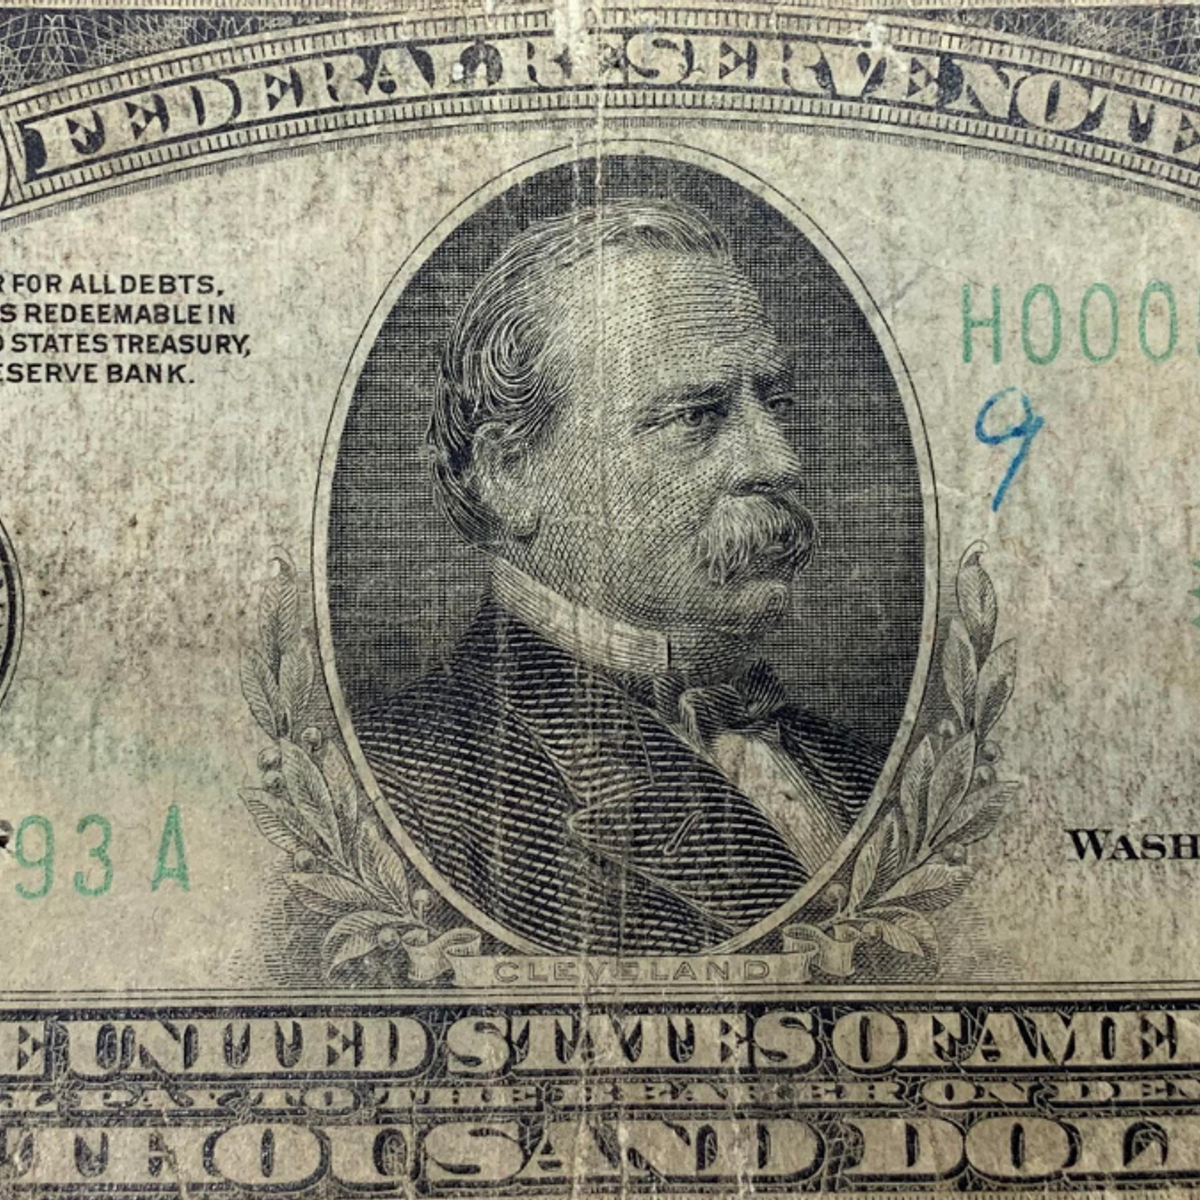 Teller Shares Photo of Rare $1000 Bill a Customer Brought in to